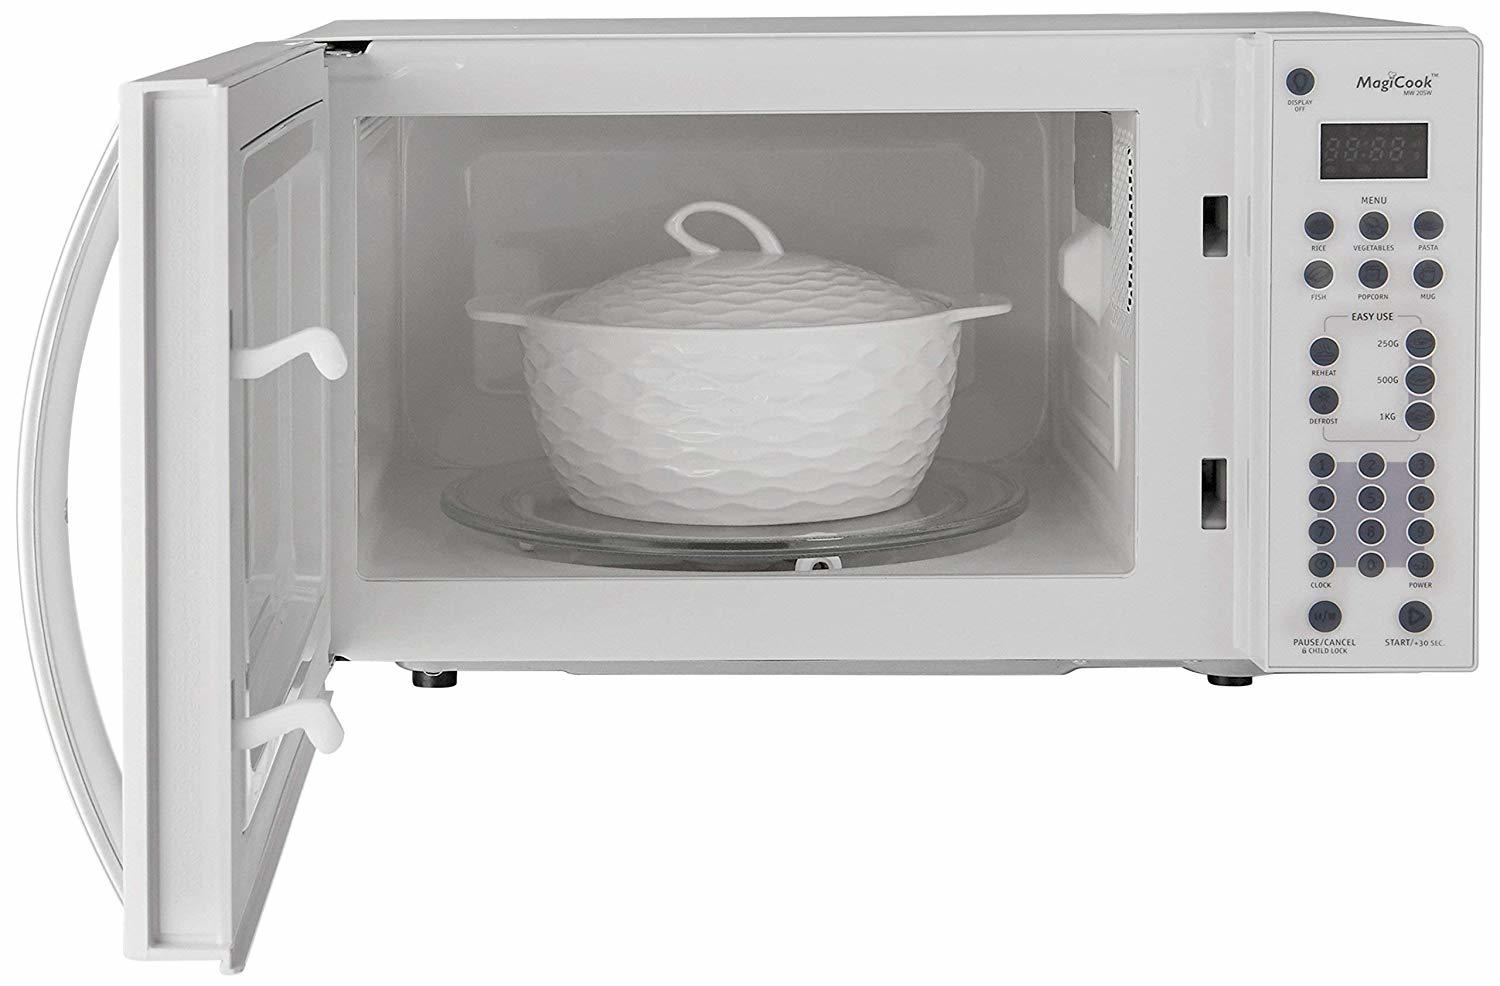 Whirlpool 20 L Solo Microwave Oven (Magicook 20SW, White)